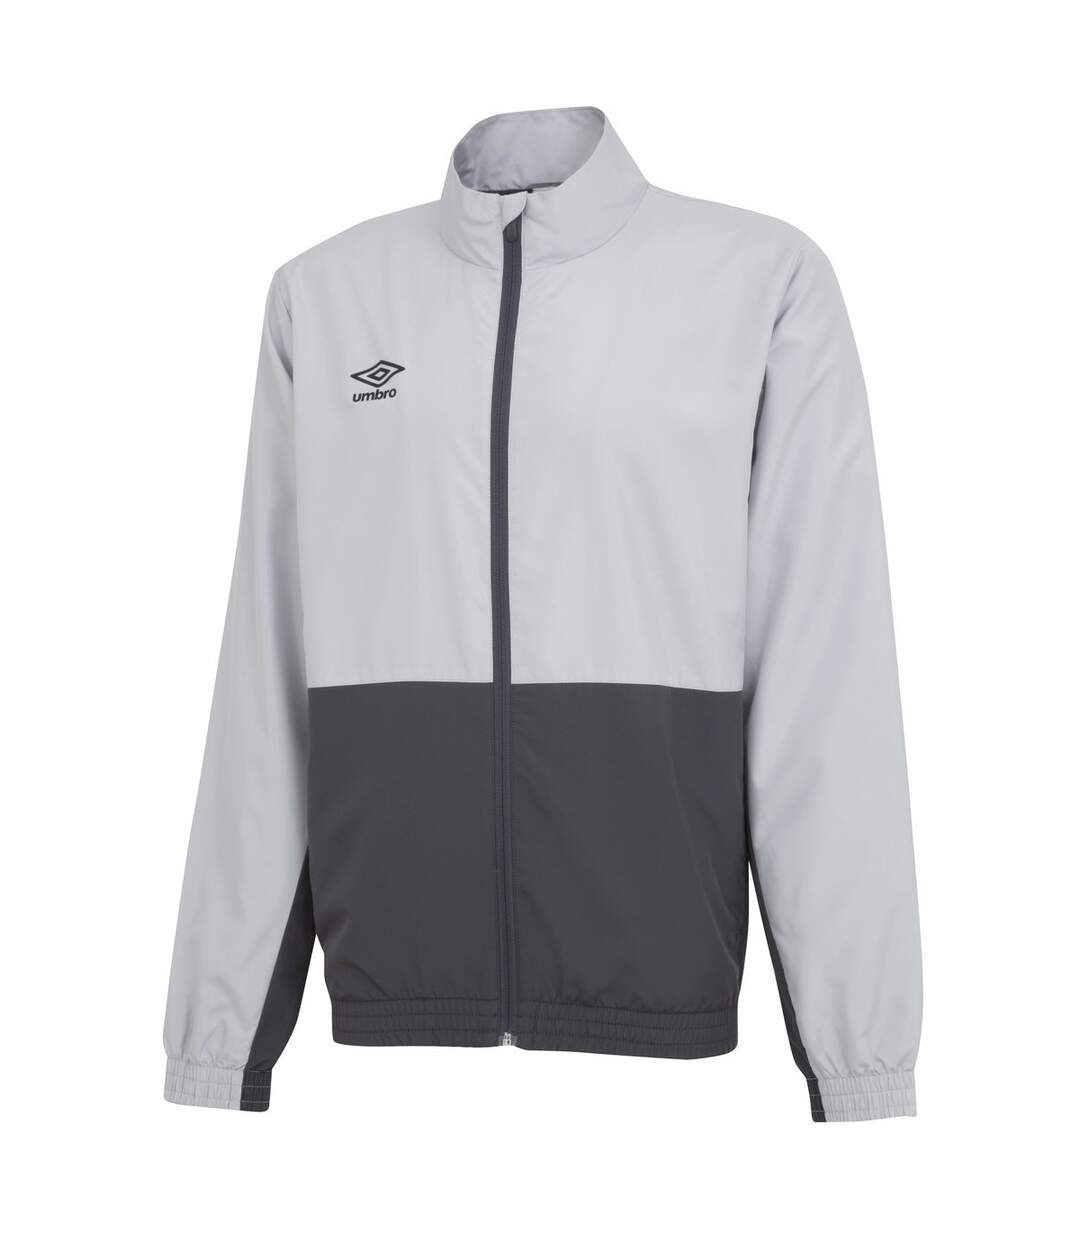 Umbro Mens Woven Training Jacket (High Rise Gray/Carbon)